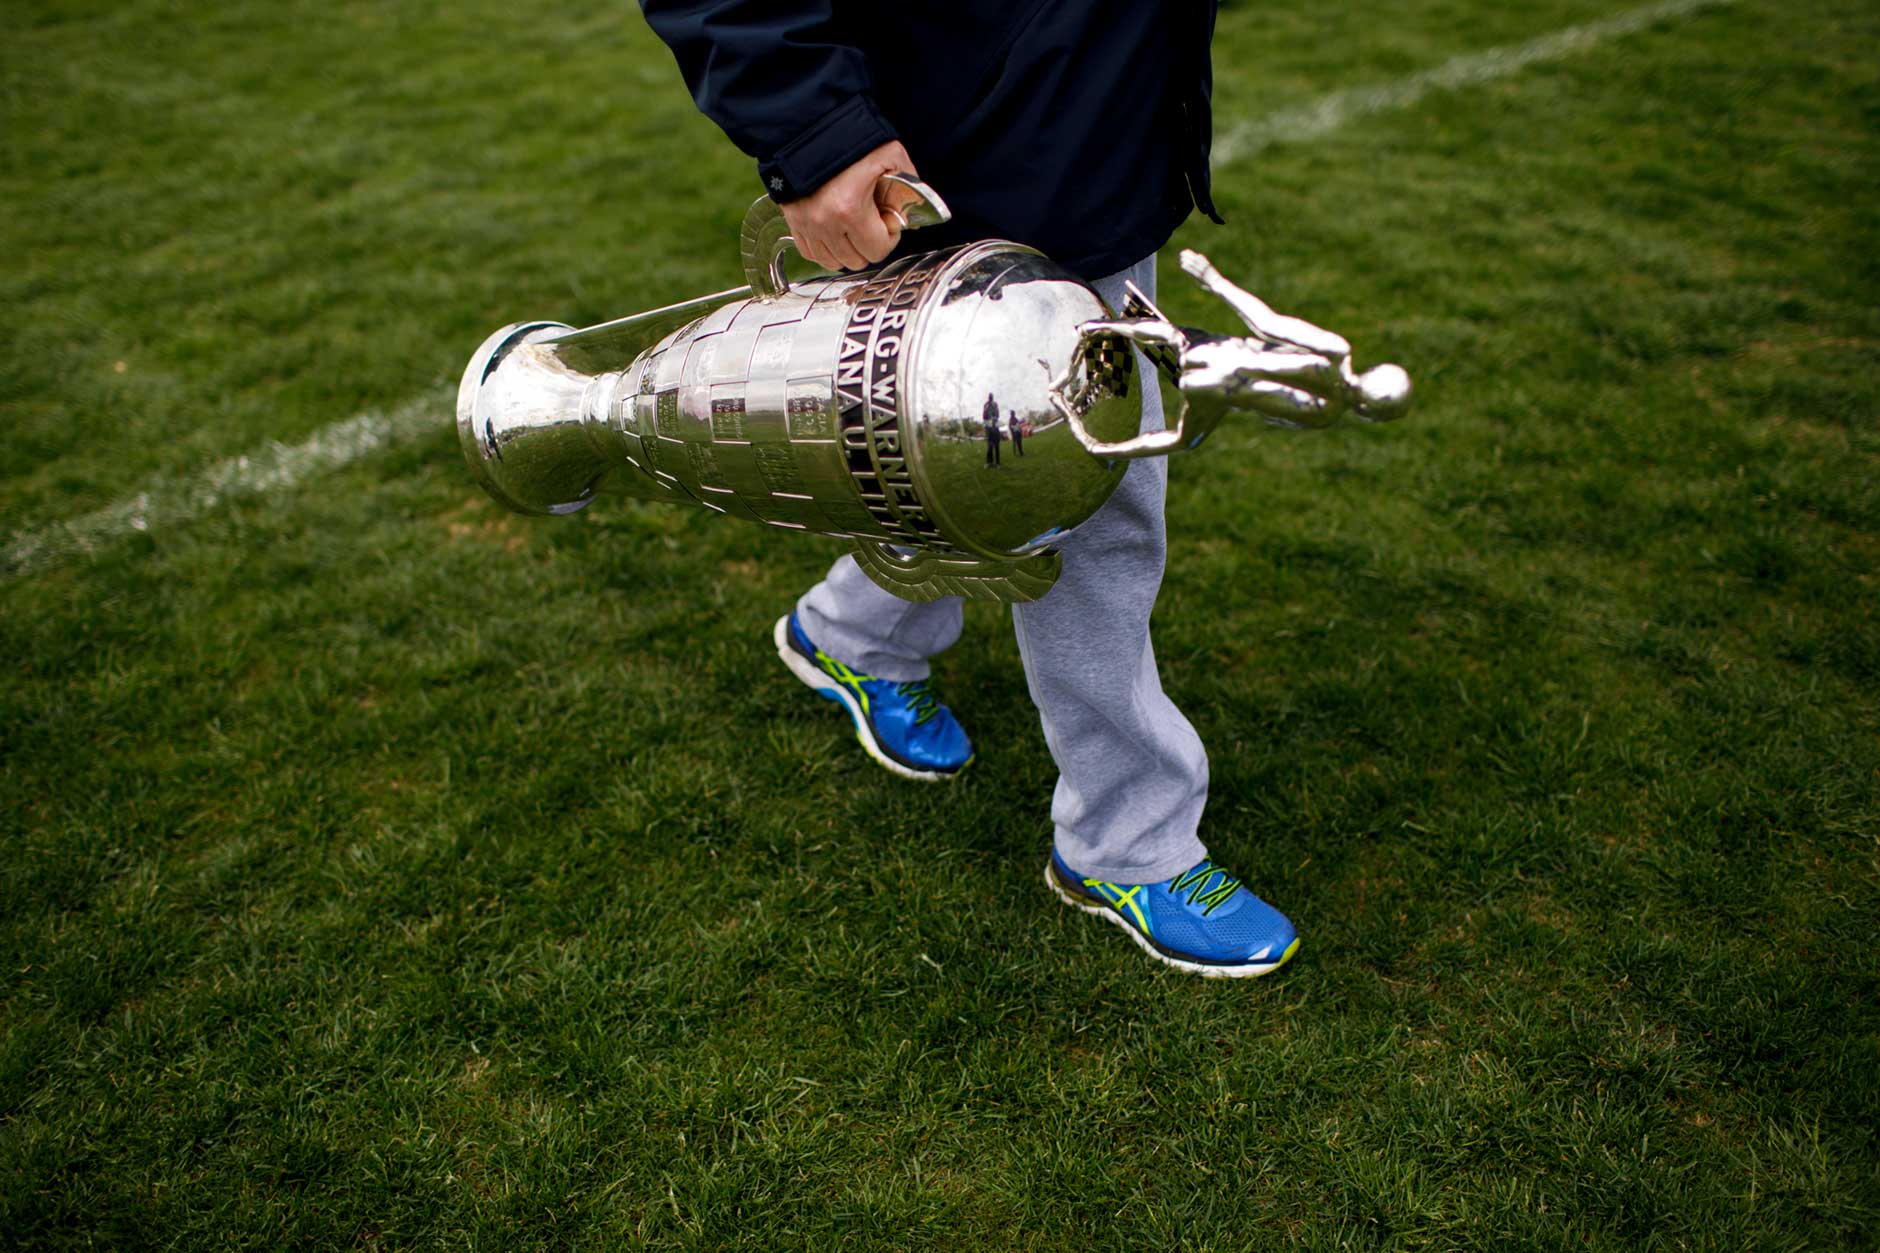 The Borg-Warner Trophy is carried across the infield before the Men's Little 500 at Bill Armstrong Stadium on Saturday, April 22, 2017. (James Brosher/IU Communications)